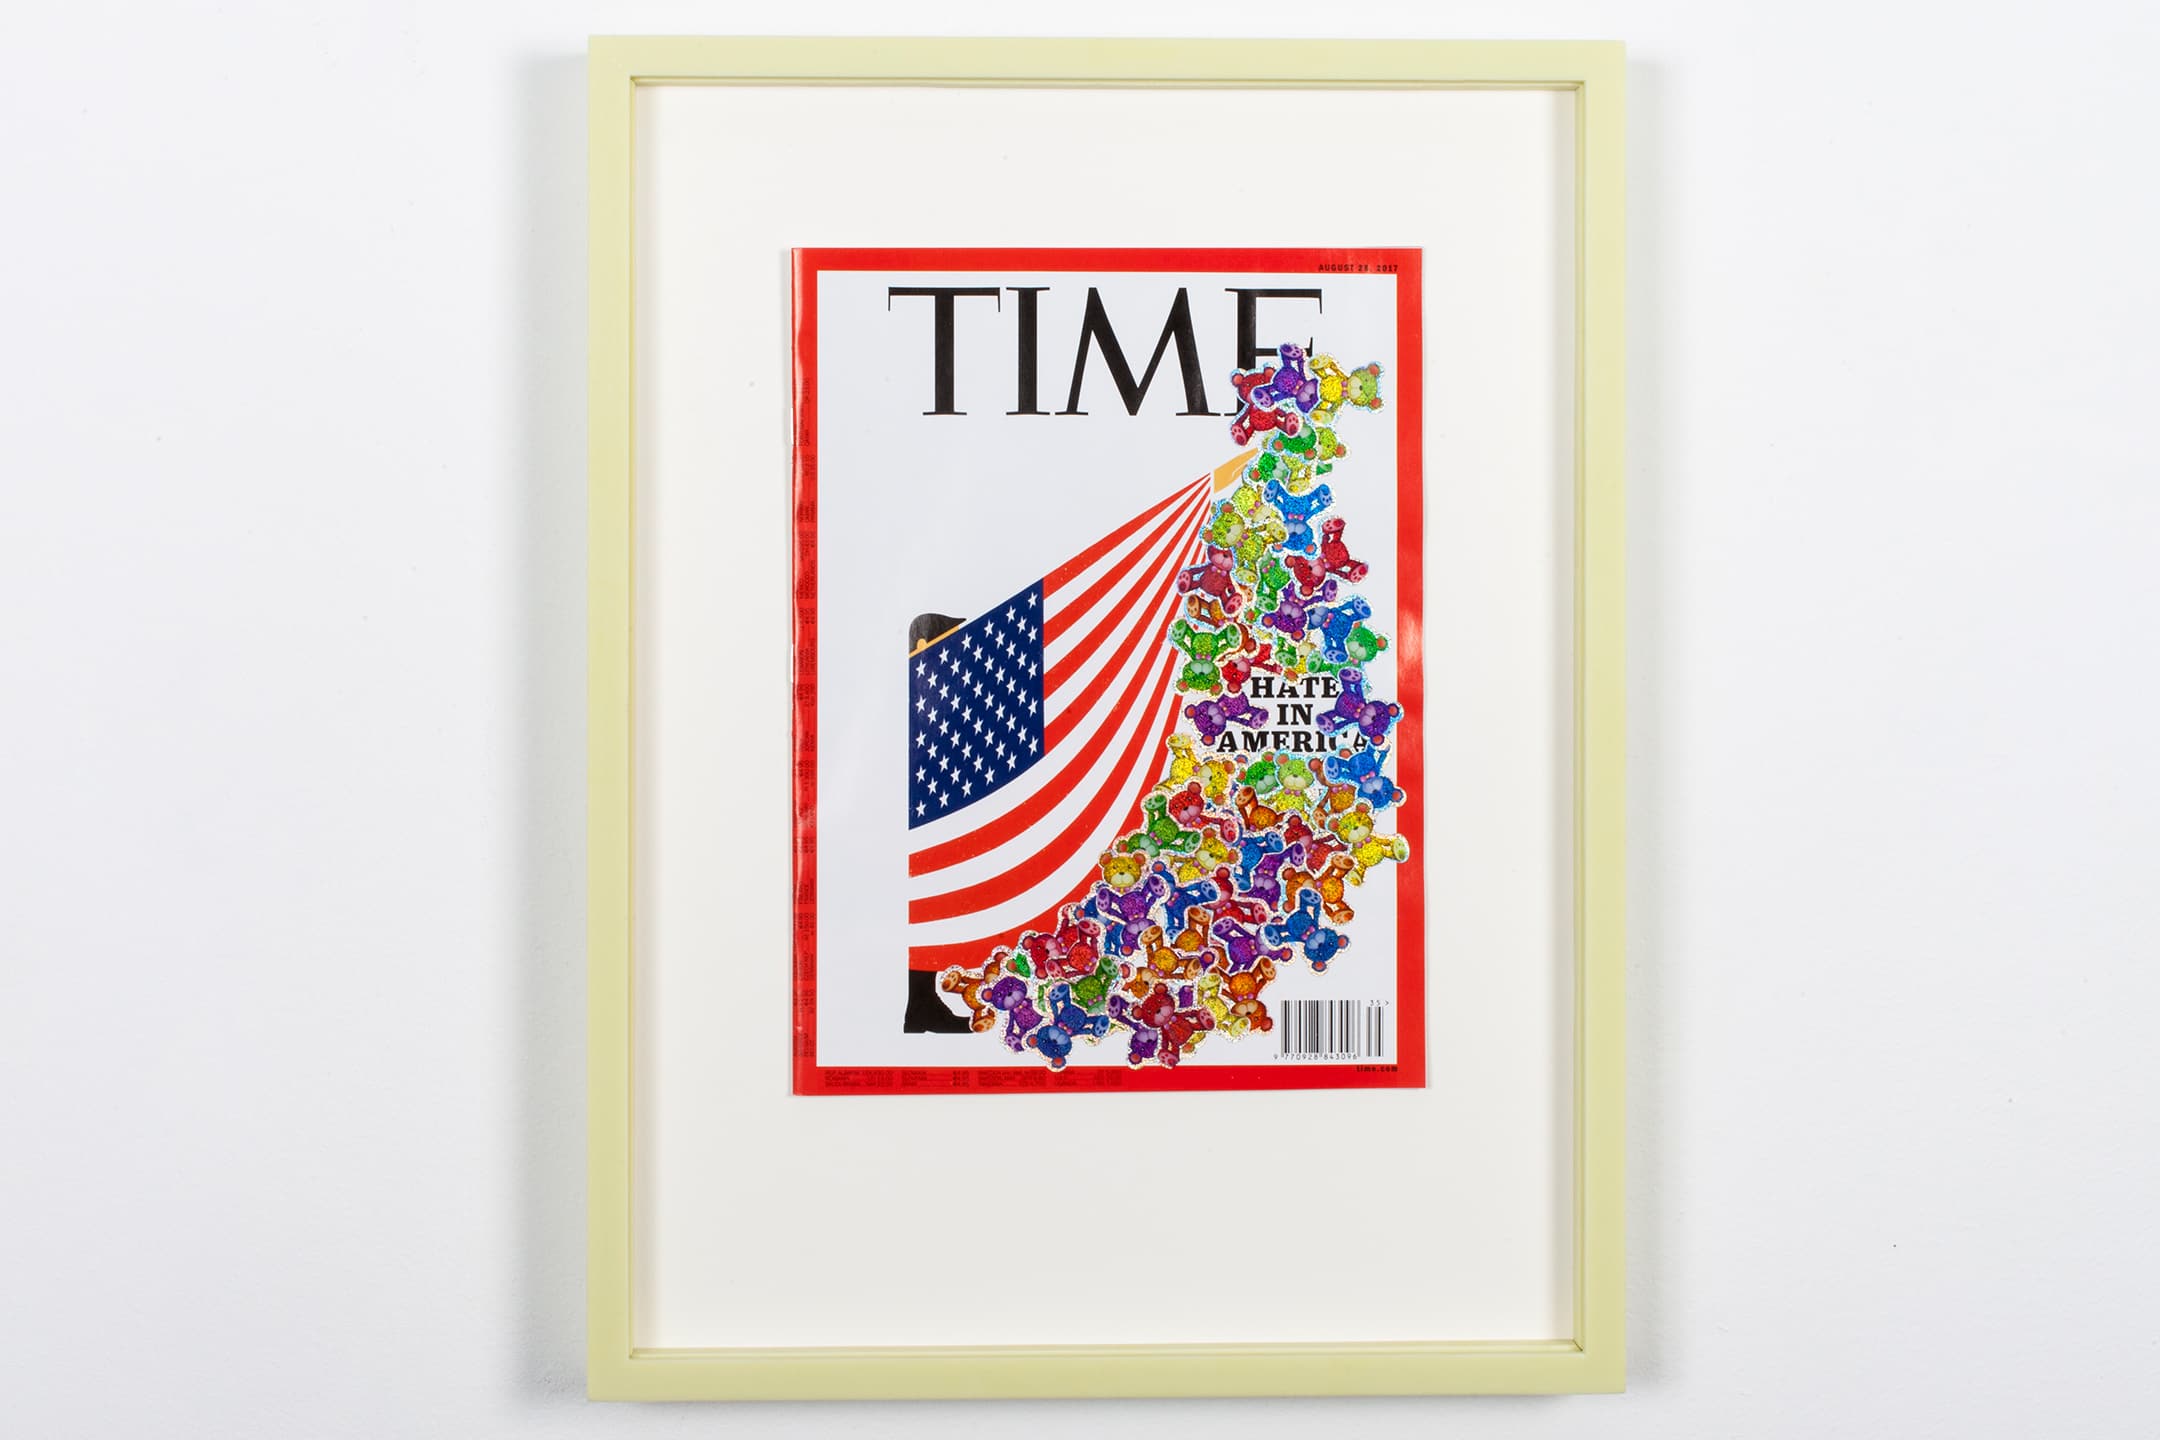 SOME TIME (HATE IN AMERICA) 1715/1, 2017